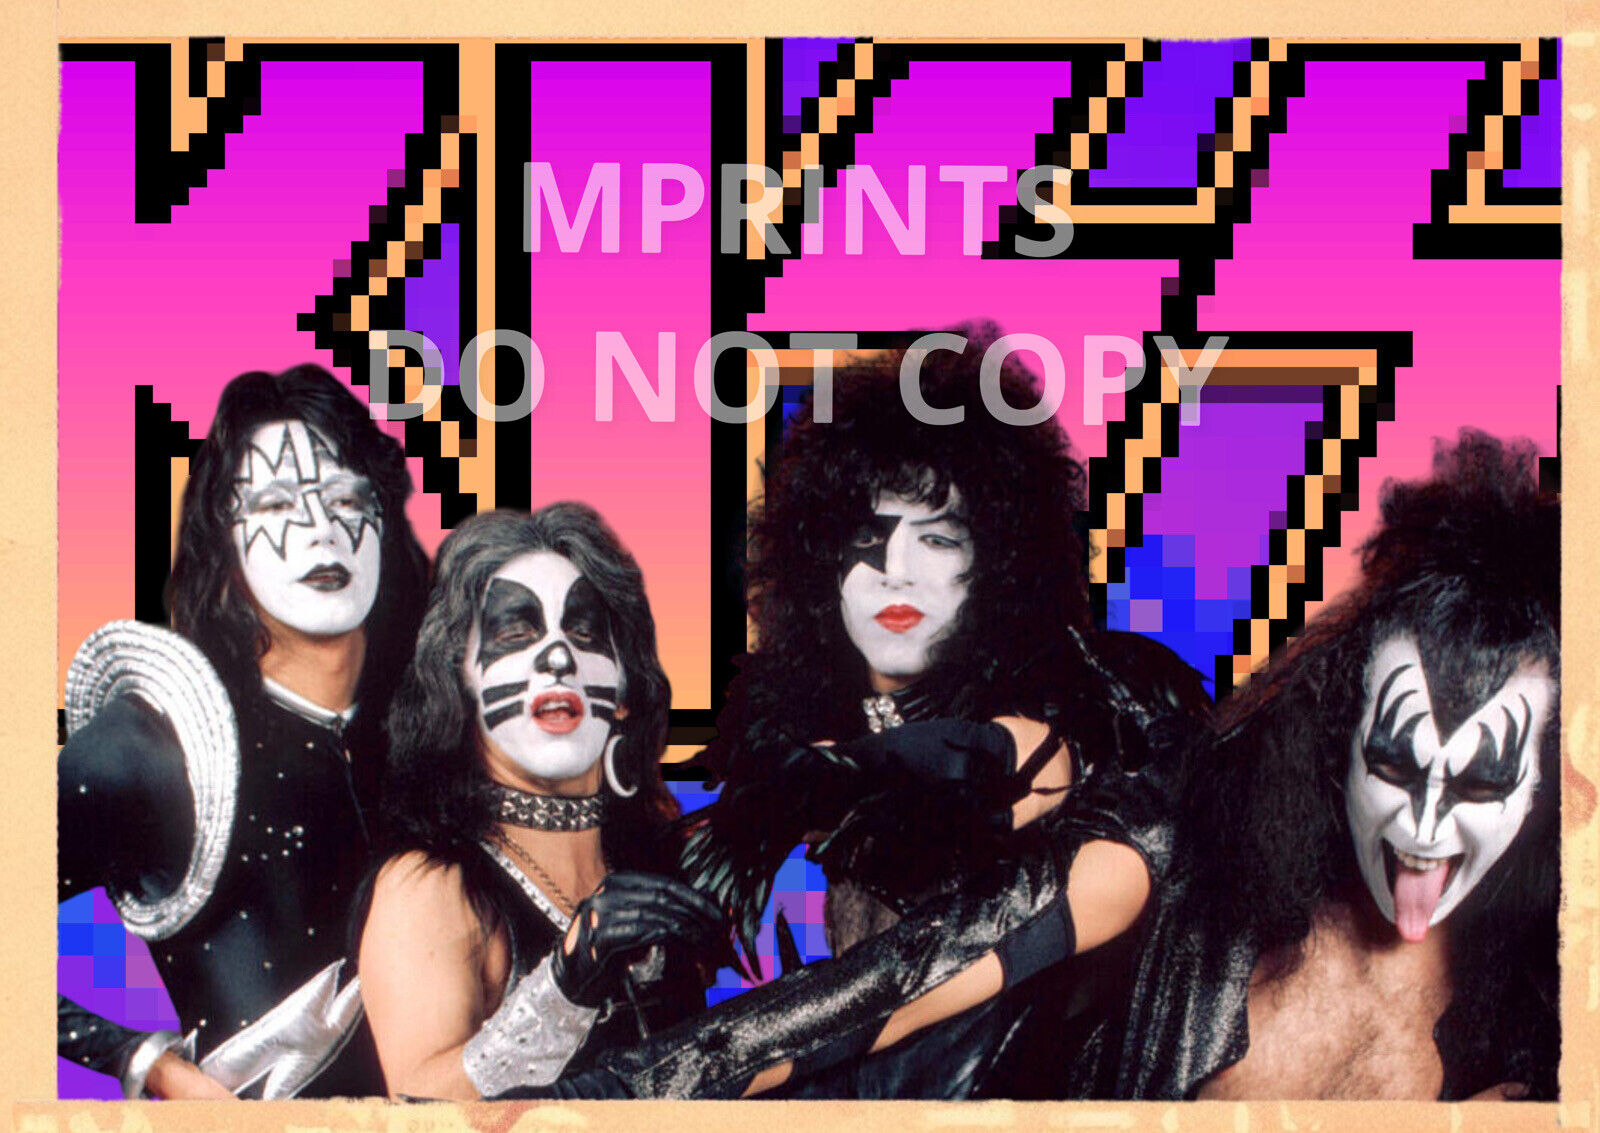 Kiss Band Art Card Limited /9 MPRINTS Signed By Artist